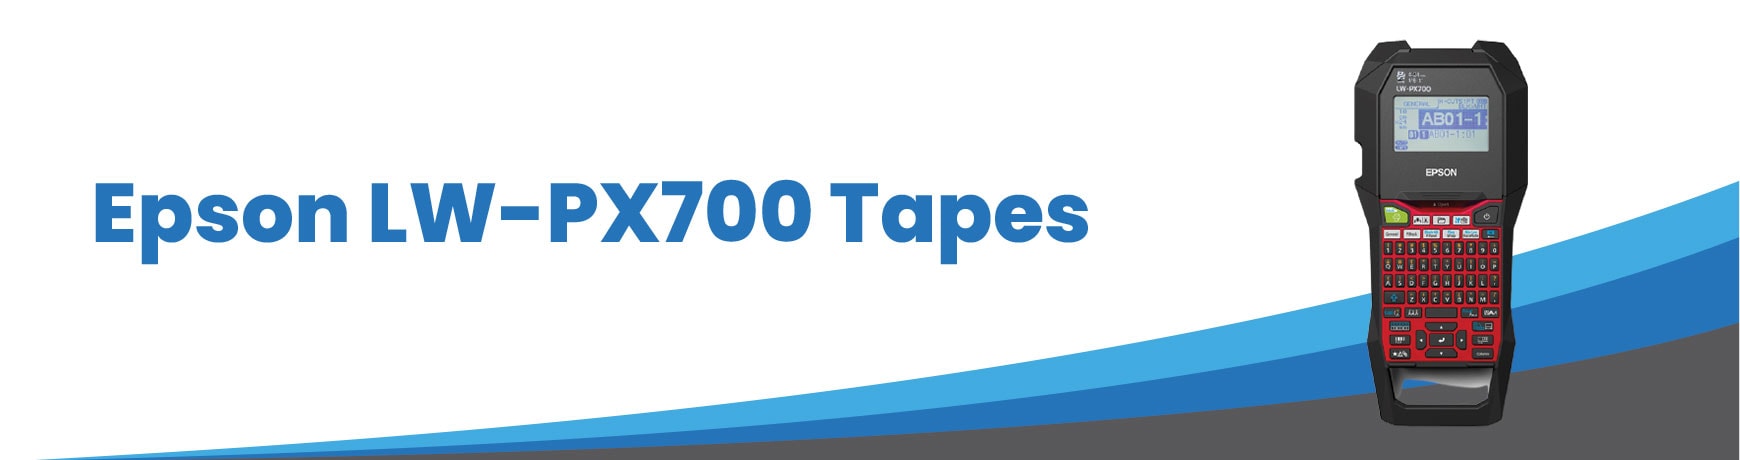 Epson LW-PX700 Tapes